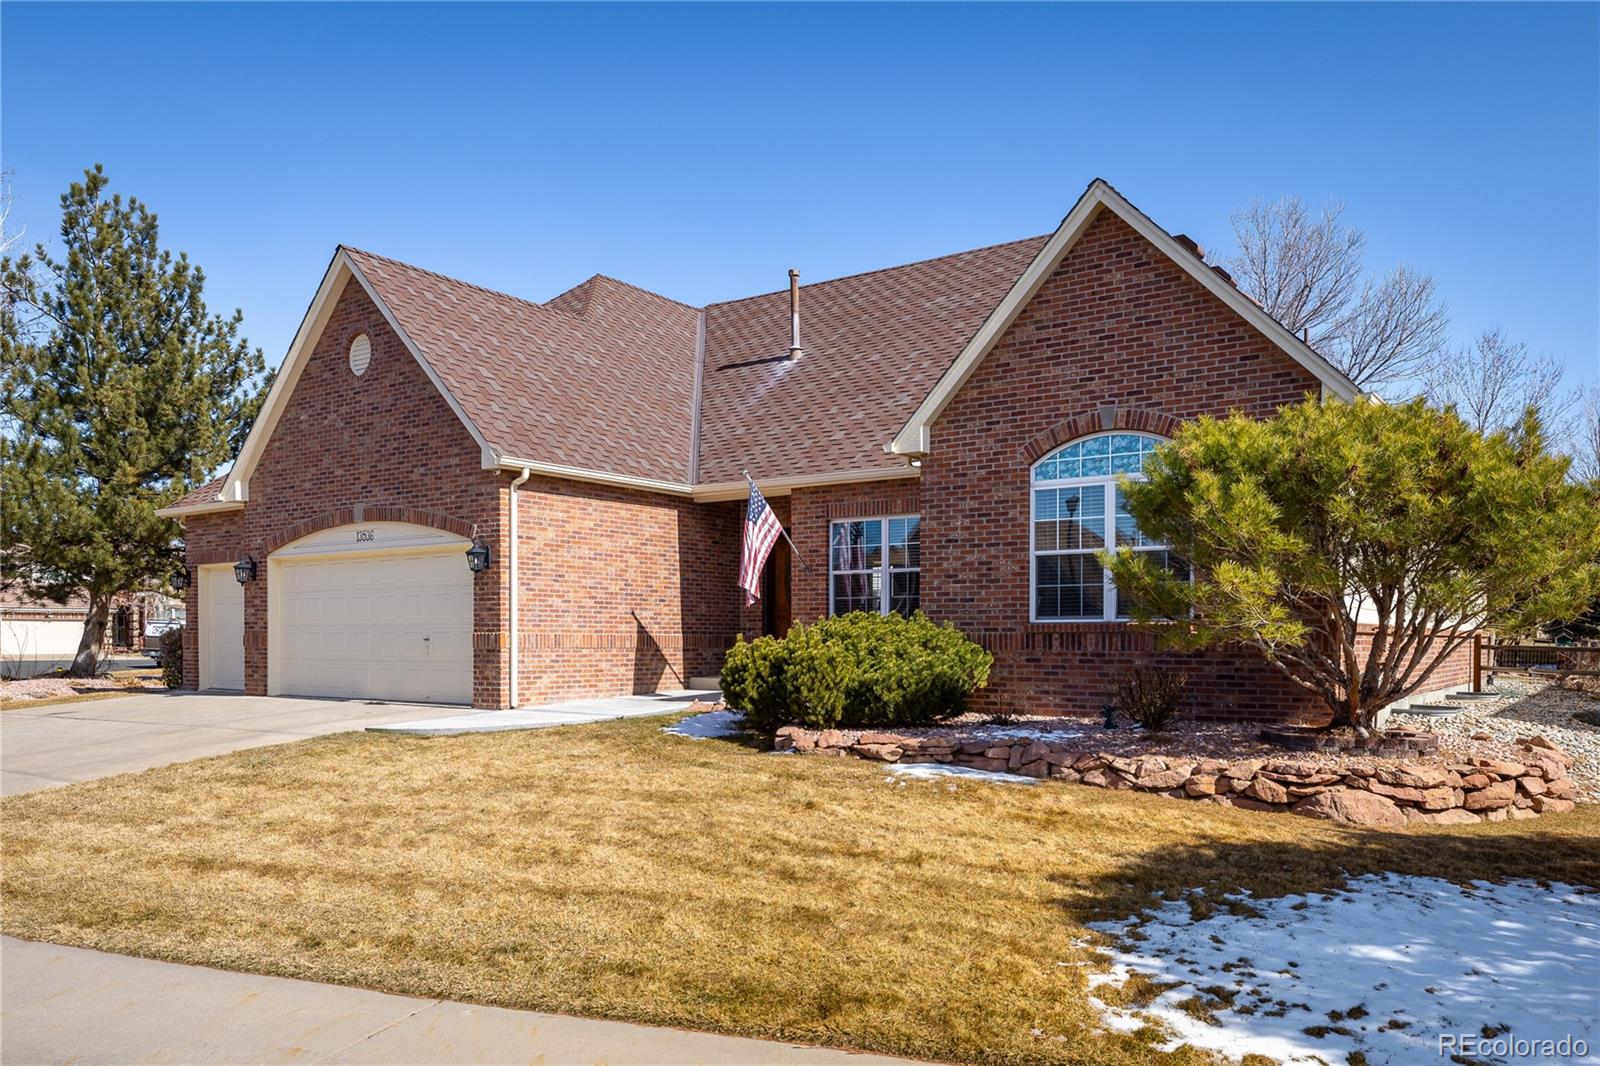 13536  thorncreek circle, thornton sold home. Closed on 2024-03-29 for $735,000.